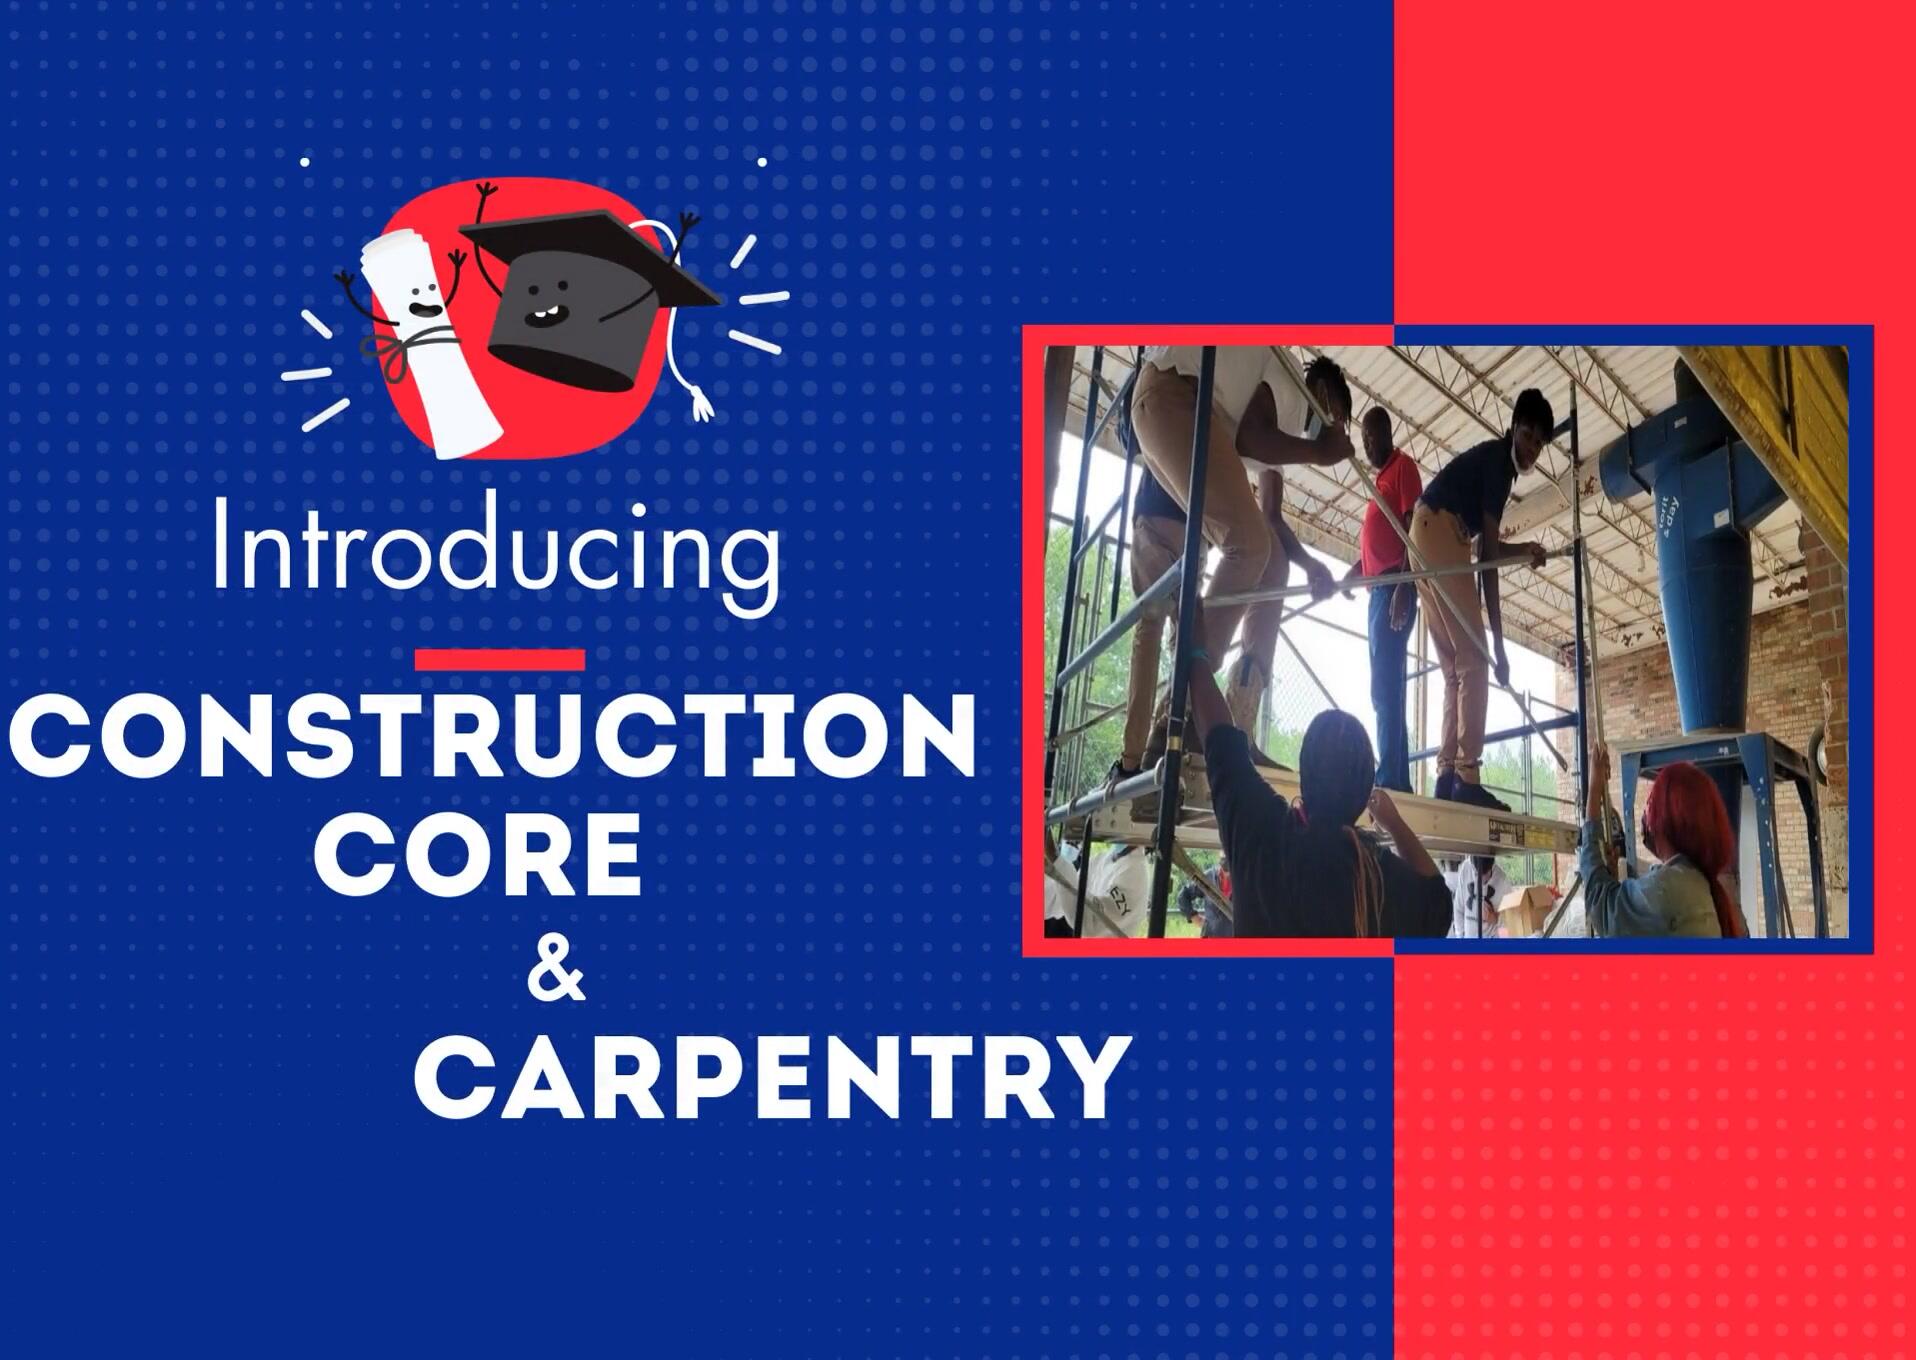 Introducing Construction Core & Carpentry